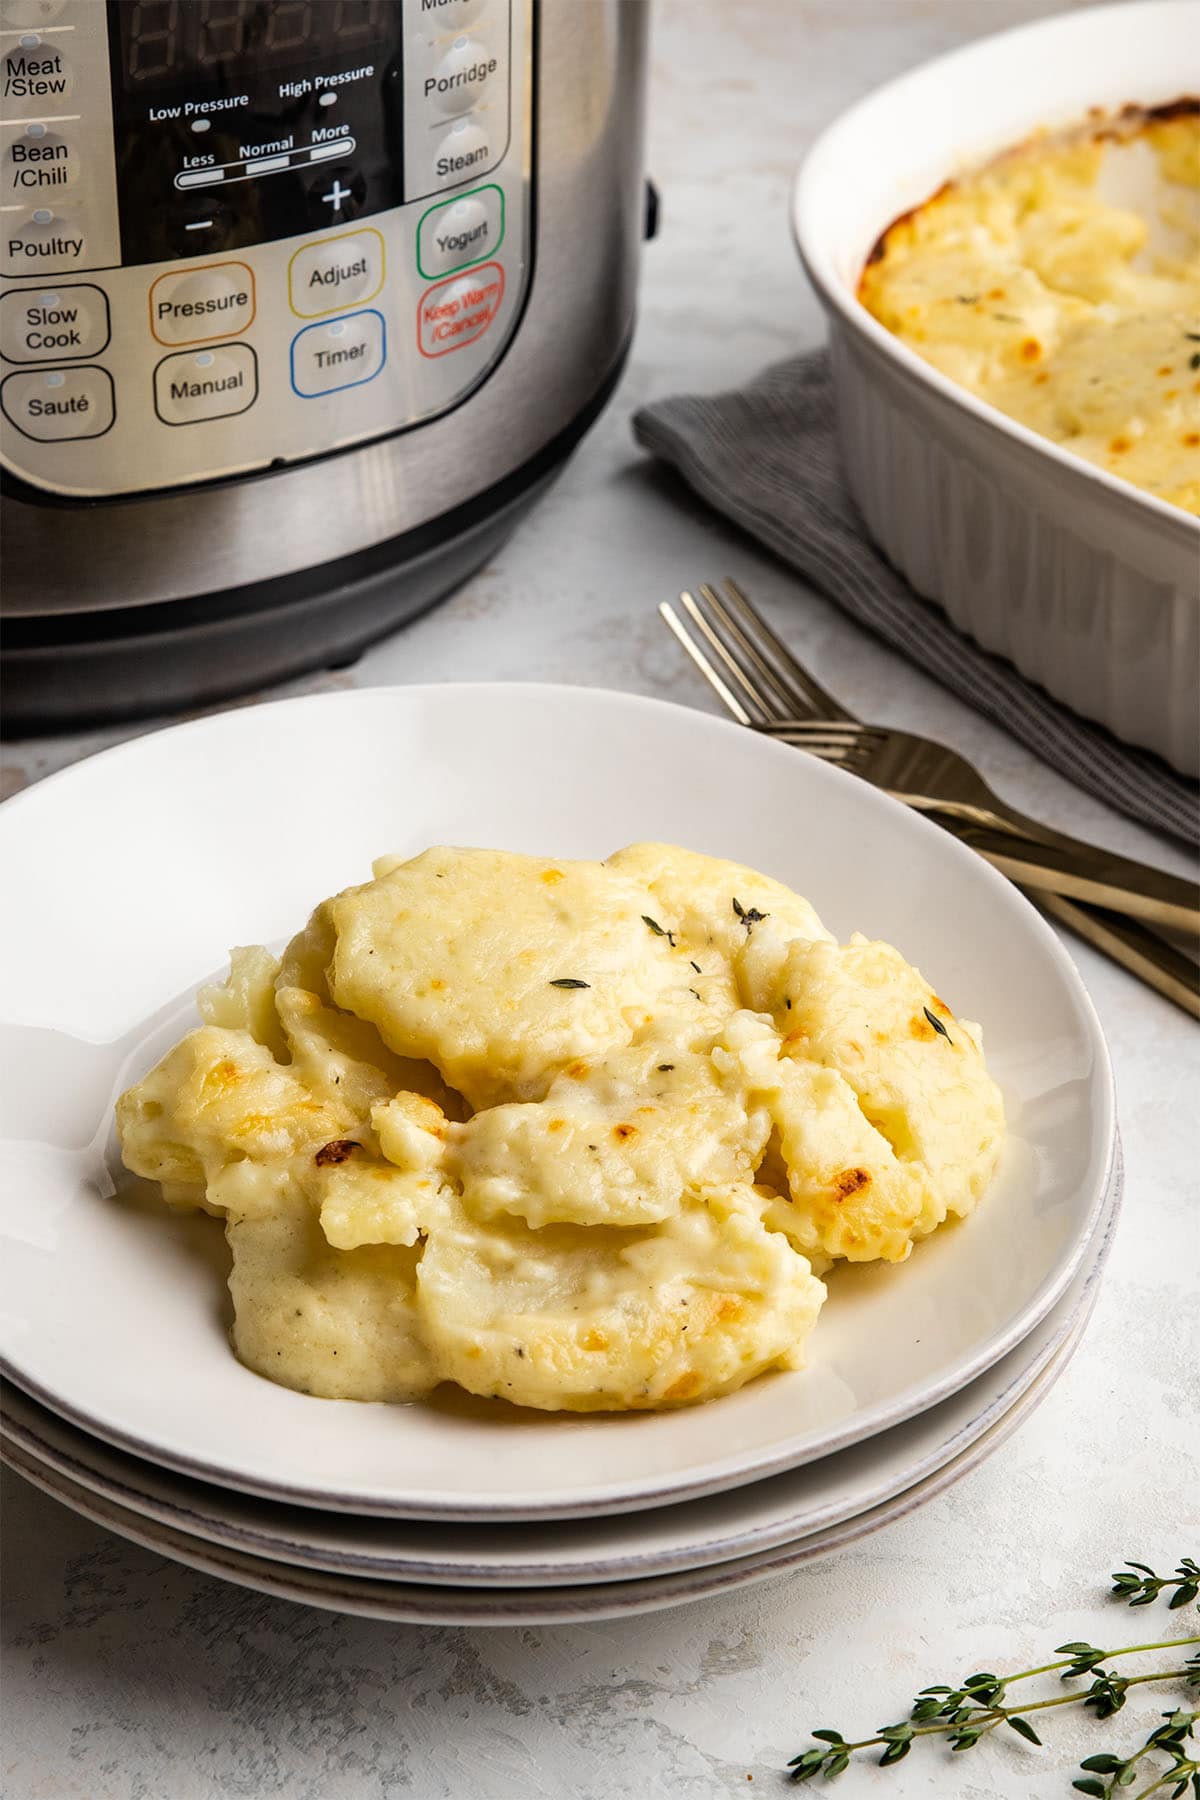 A serving of scalloped potatoes on a stack of white plates, in front of an Instant Pot and the casserole dish.